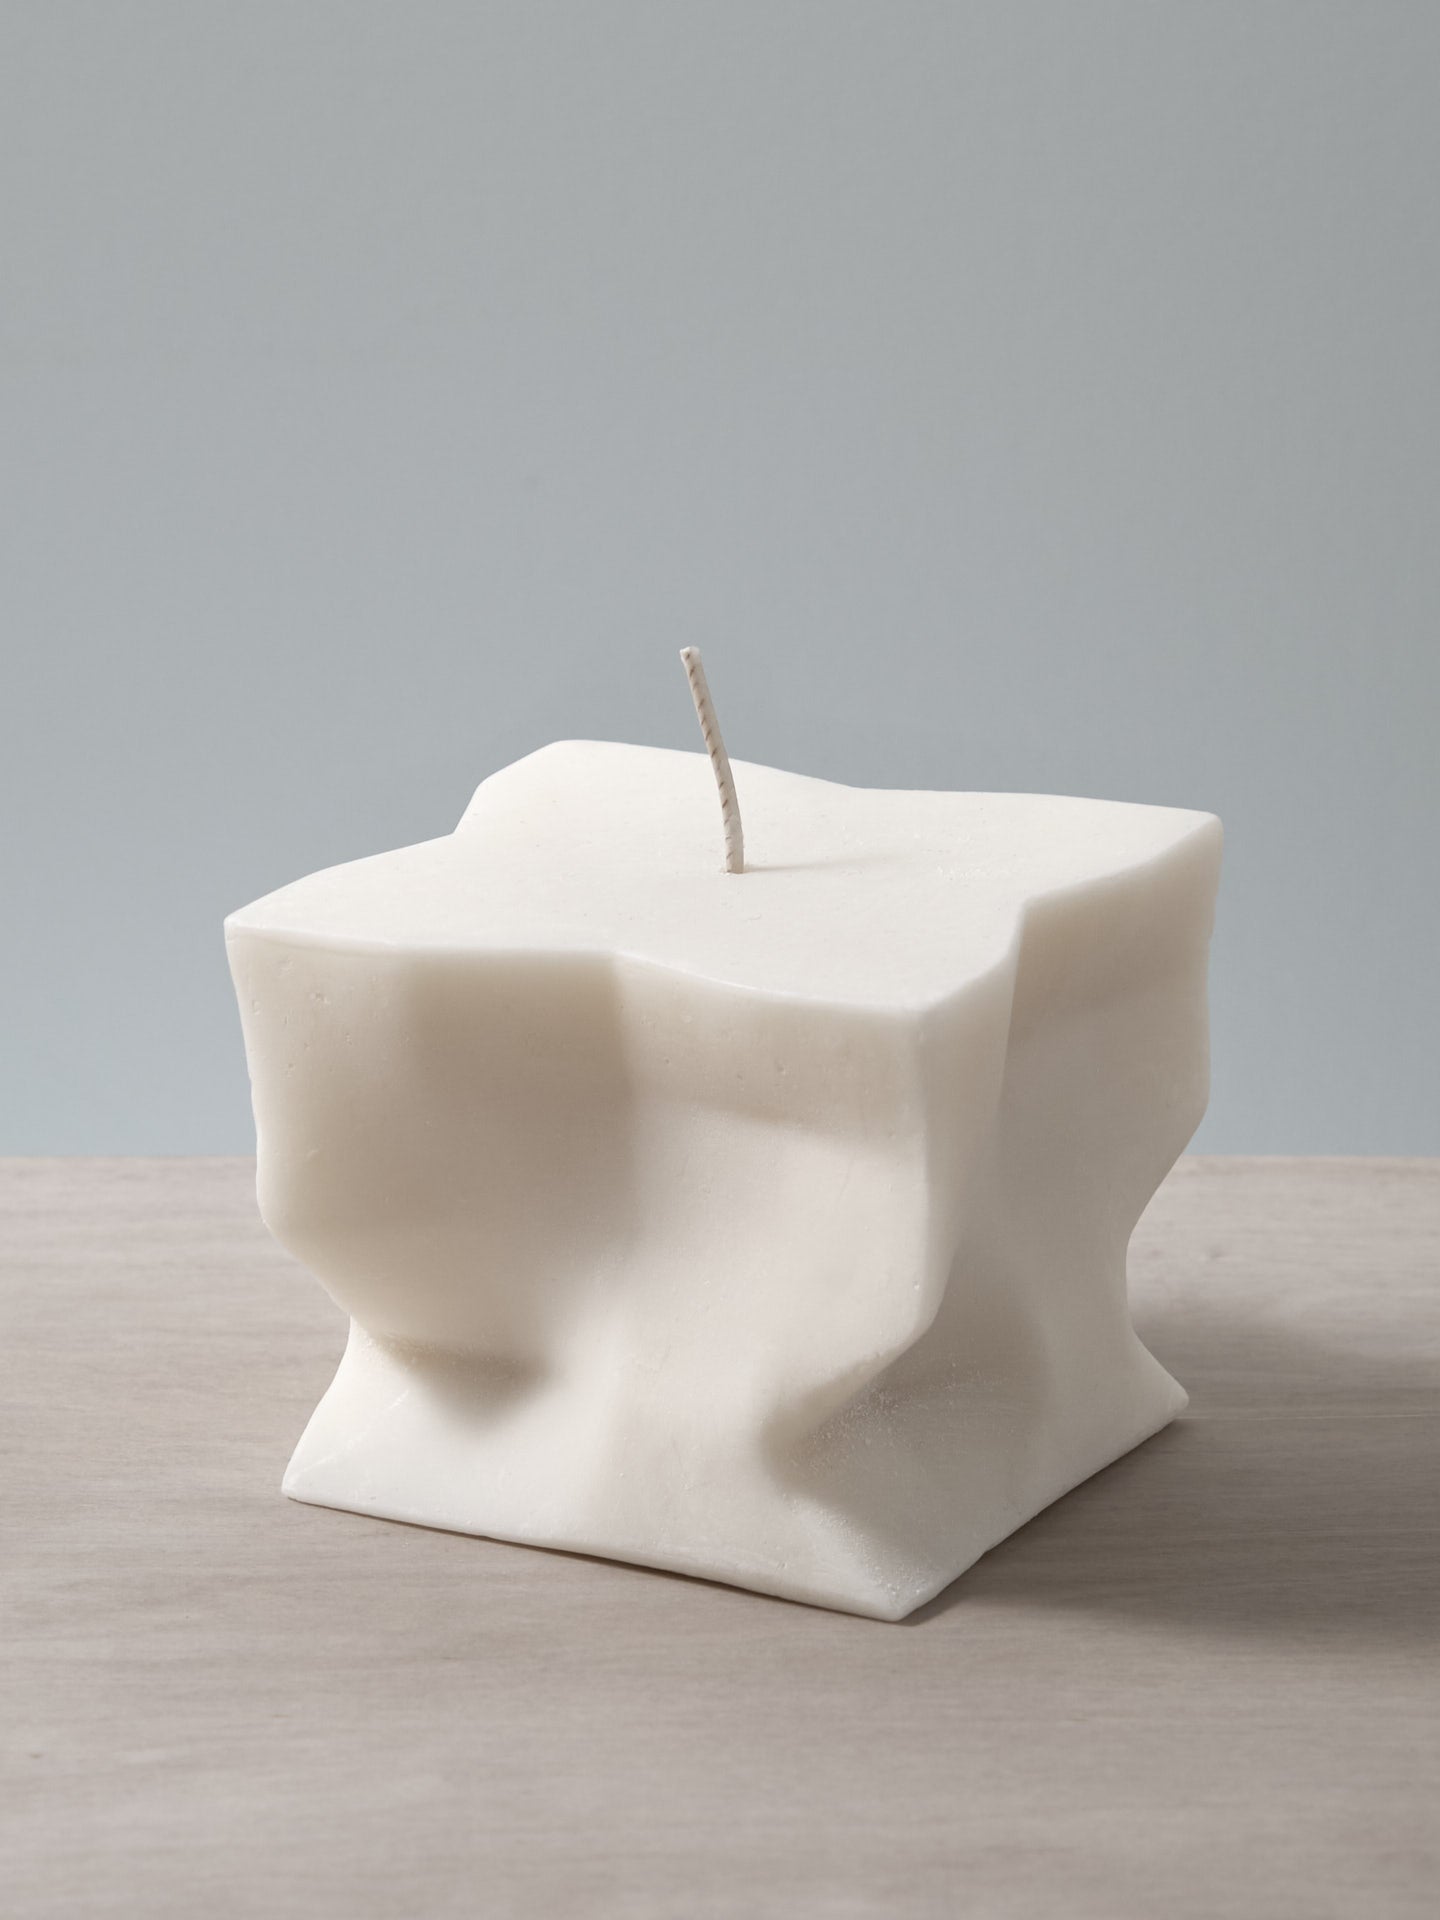 A Baltazar Candle sitting on top of a wooden table. (Brand Name: Andrej Urem)